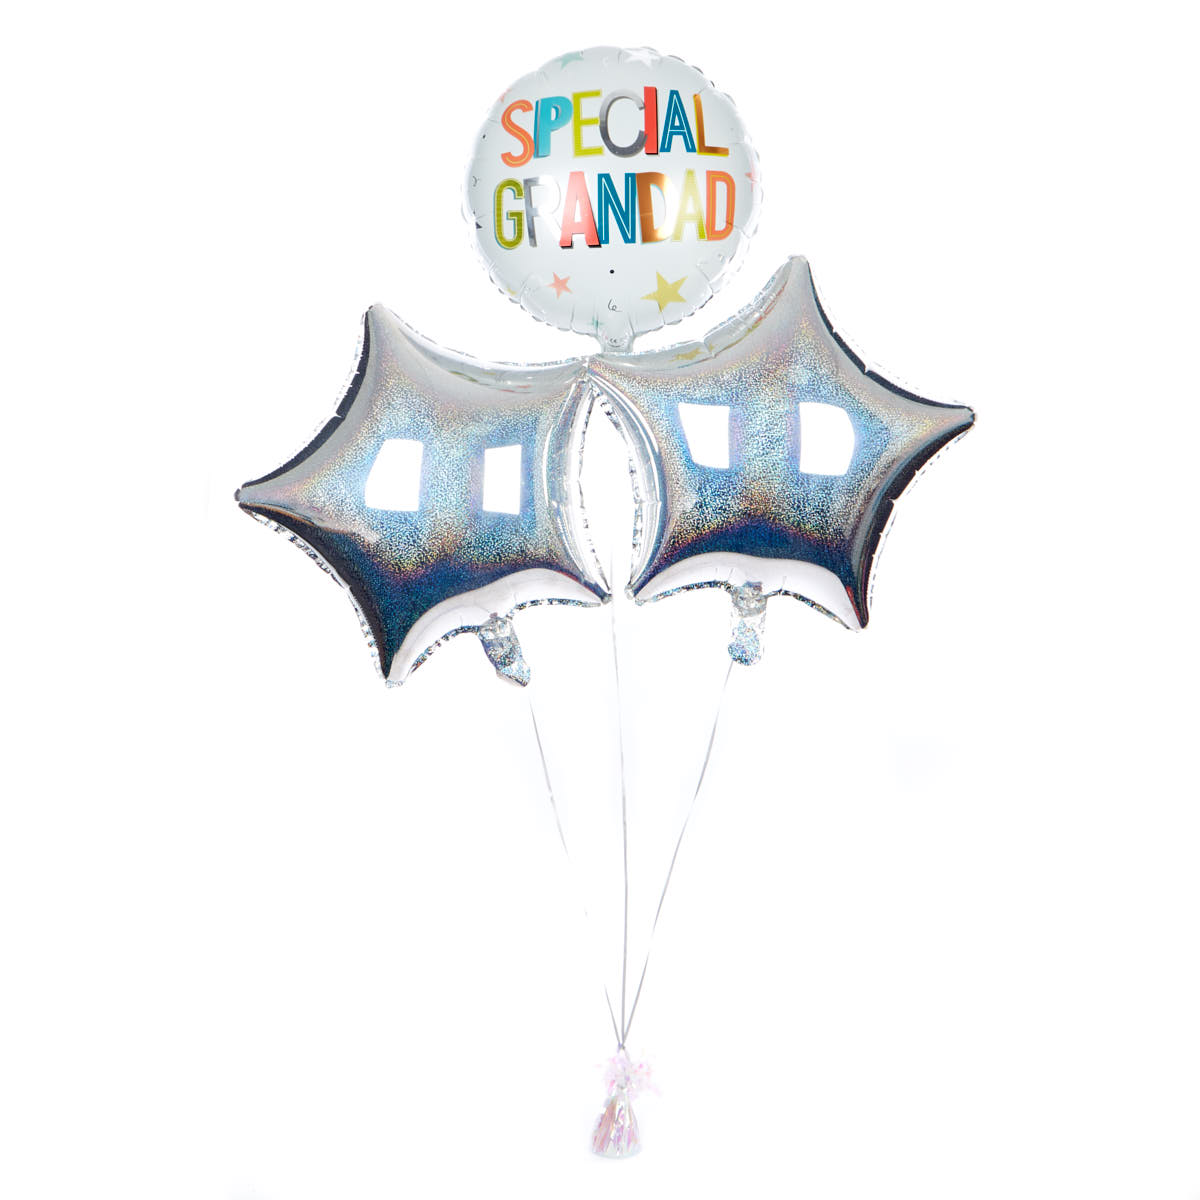 Silver Special Grandad Balloon Bouquet - DELIVERED INFLATED!